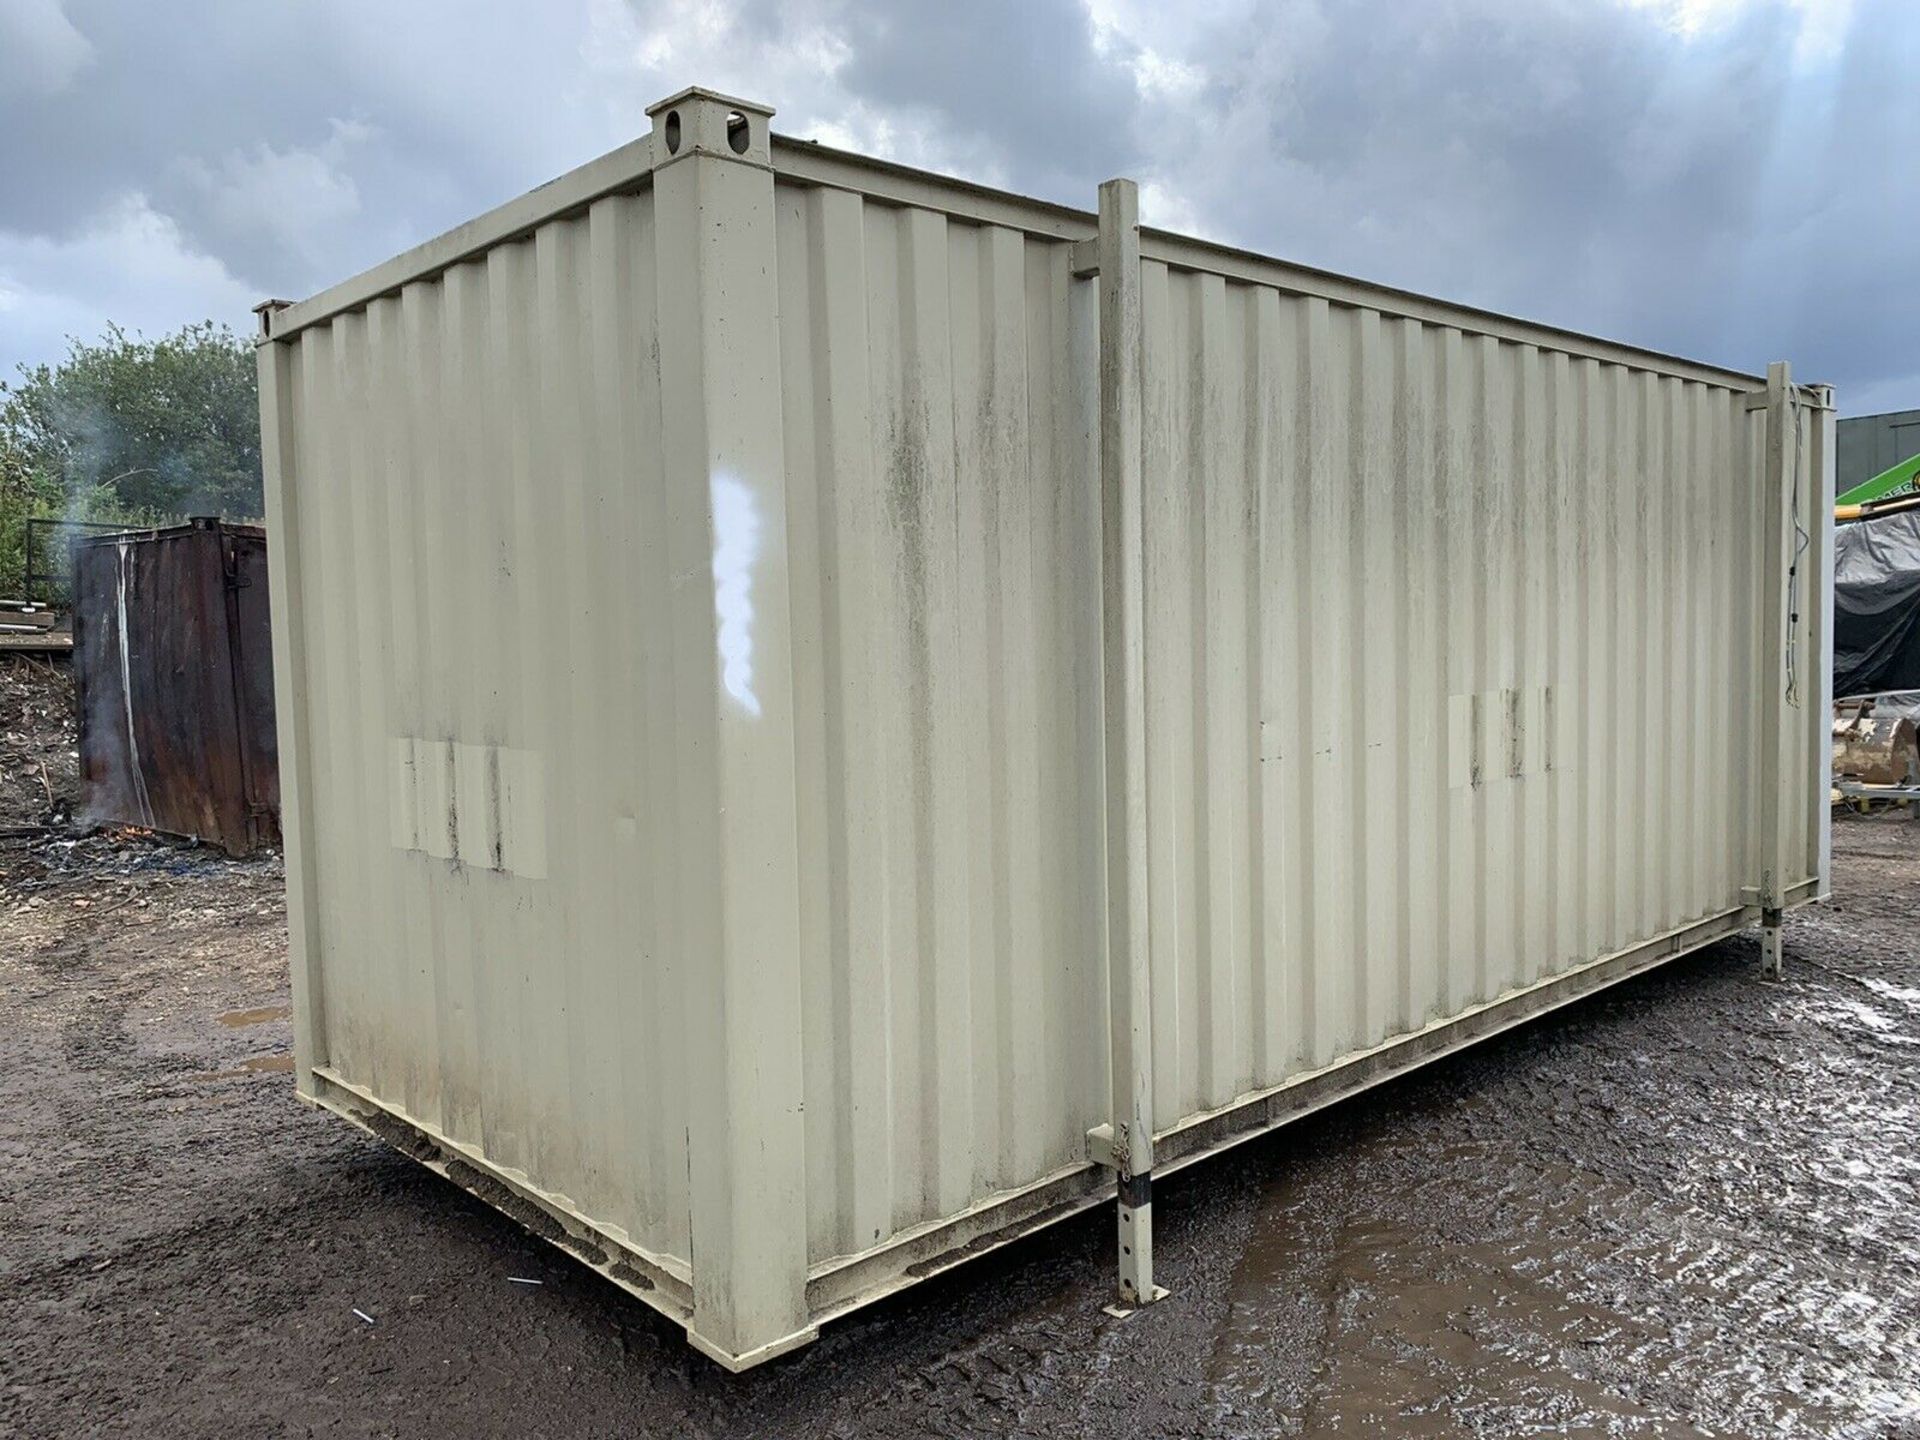 Anti Vandal Steel Portable Storage Container 20ft x 8ft - Image 5 of 10